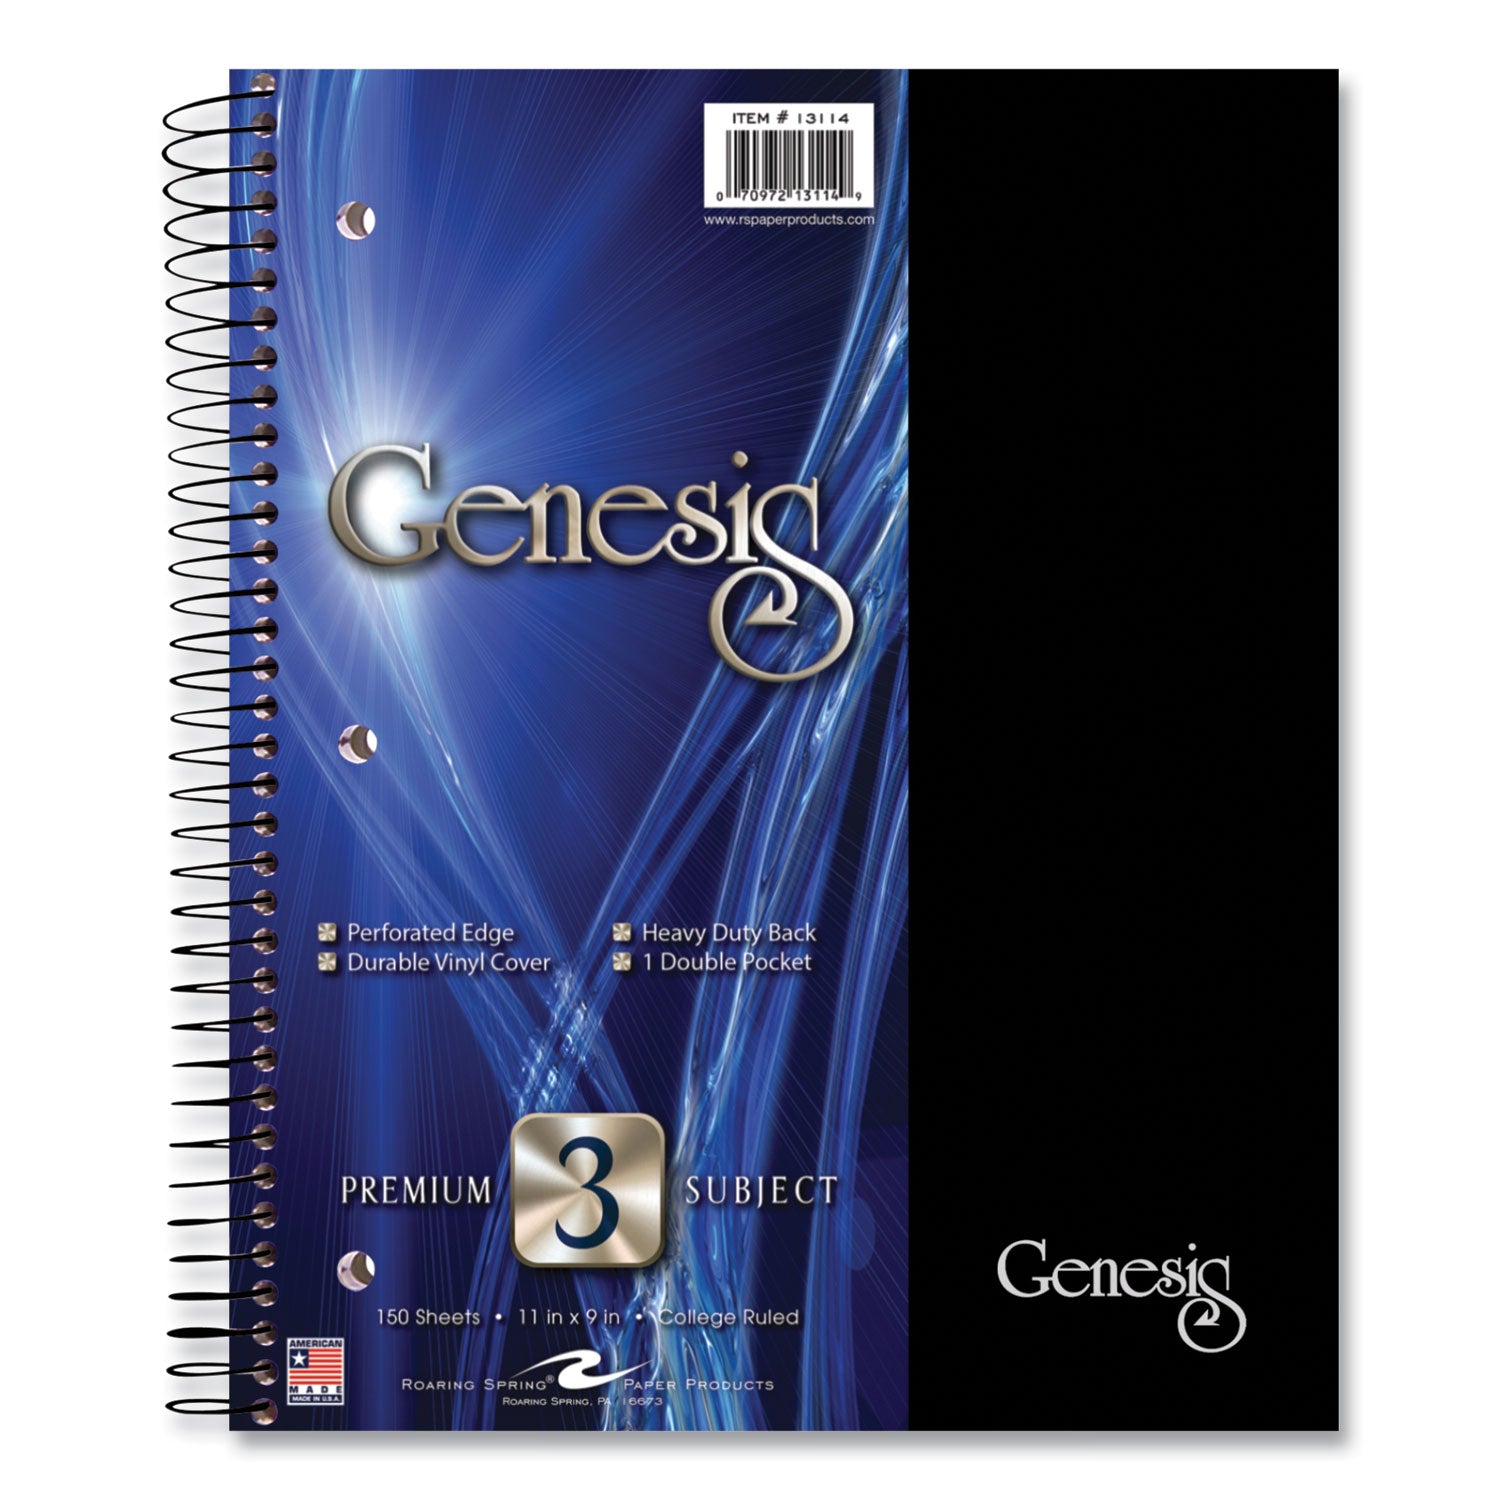 genesis-notebook-3-subject-medium-college-rule-randomly-asst-cover-color-150-11x9-sheets-12-ct-ships-in-4-6-bus-days_roa13114cs - 2